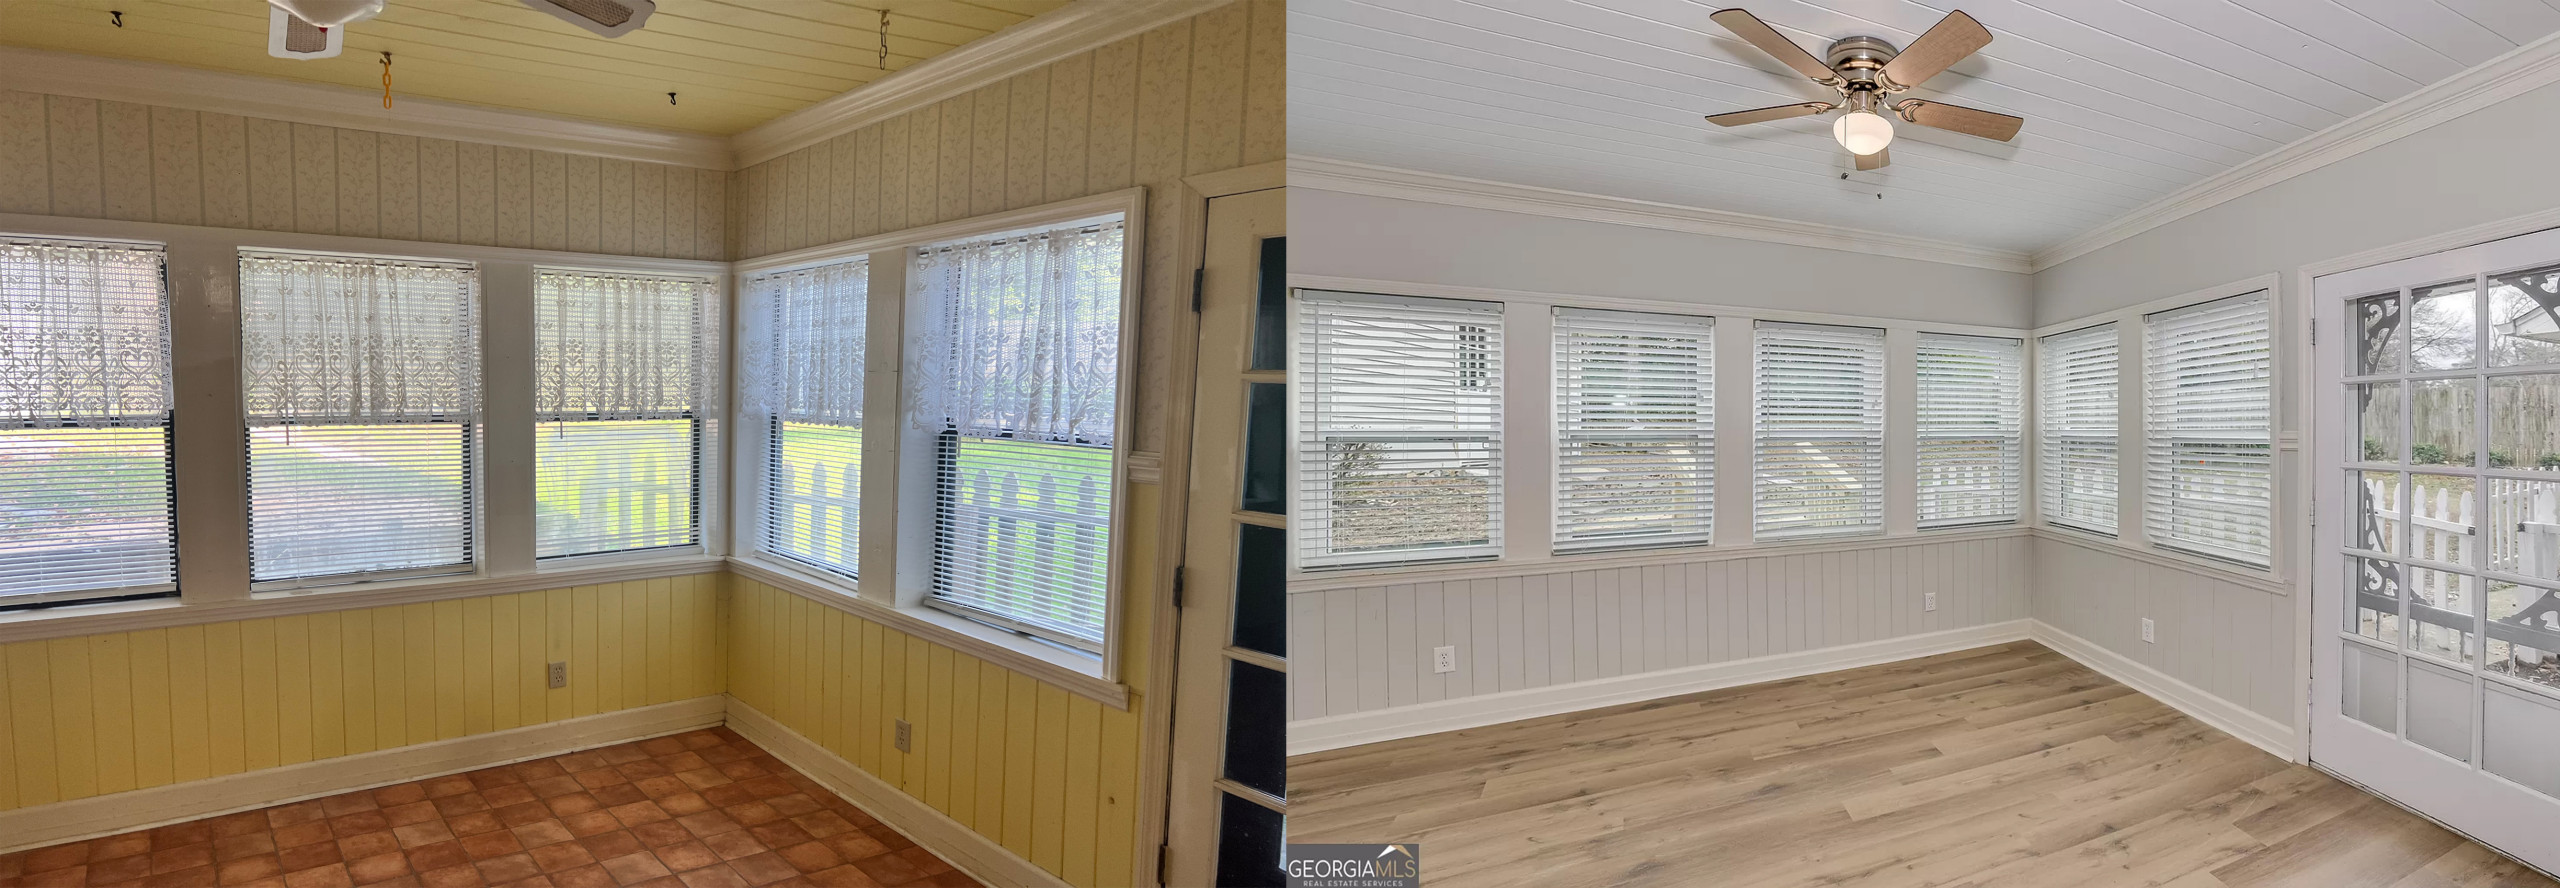 Hickory Oak Sunroom Before & After